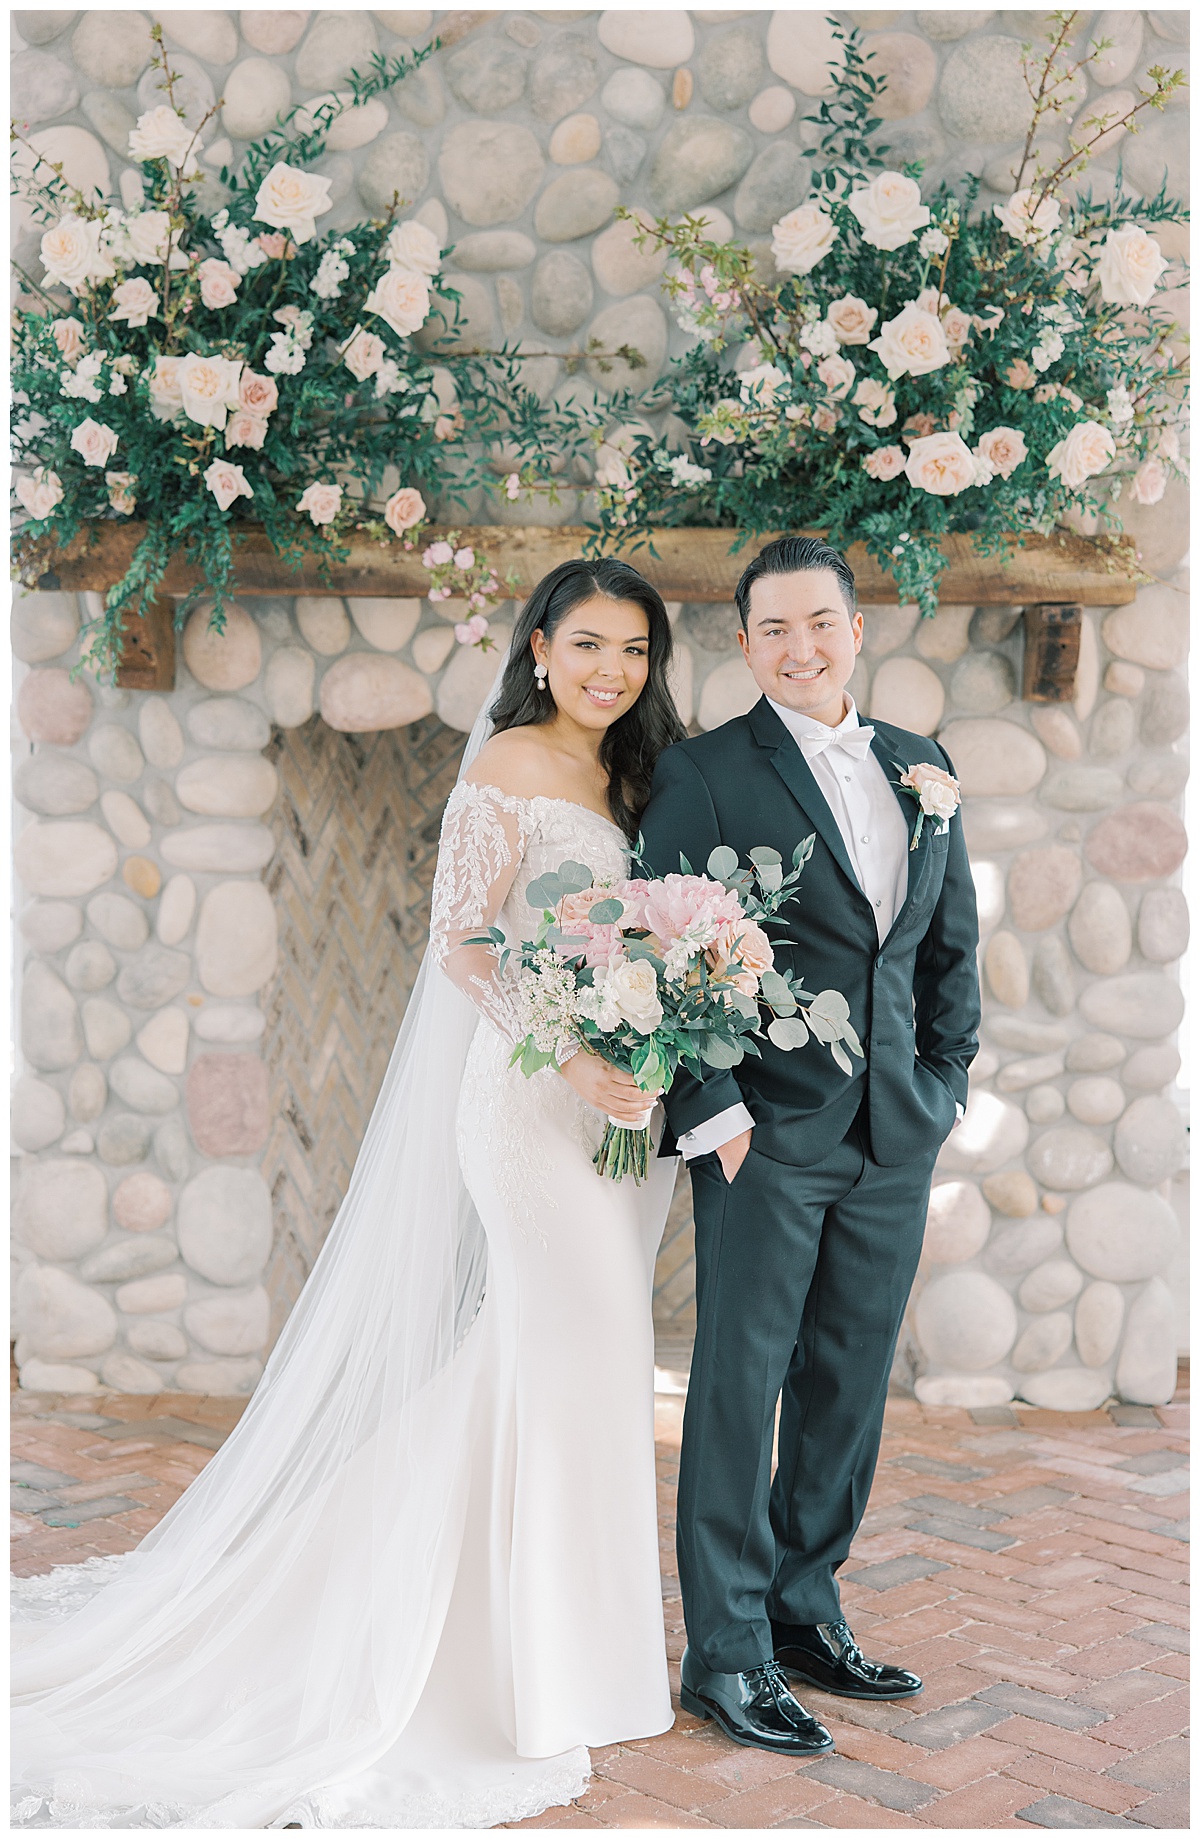 Bride and groom smile together on their wedding day with stone fireplace and mantel decor at Mallard Island Yacht Club. 